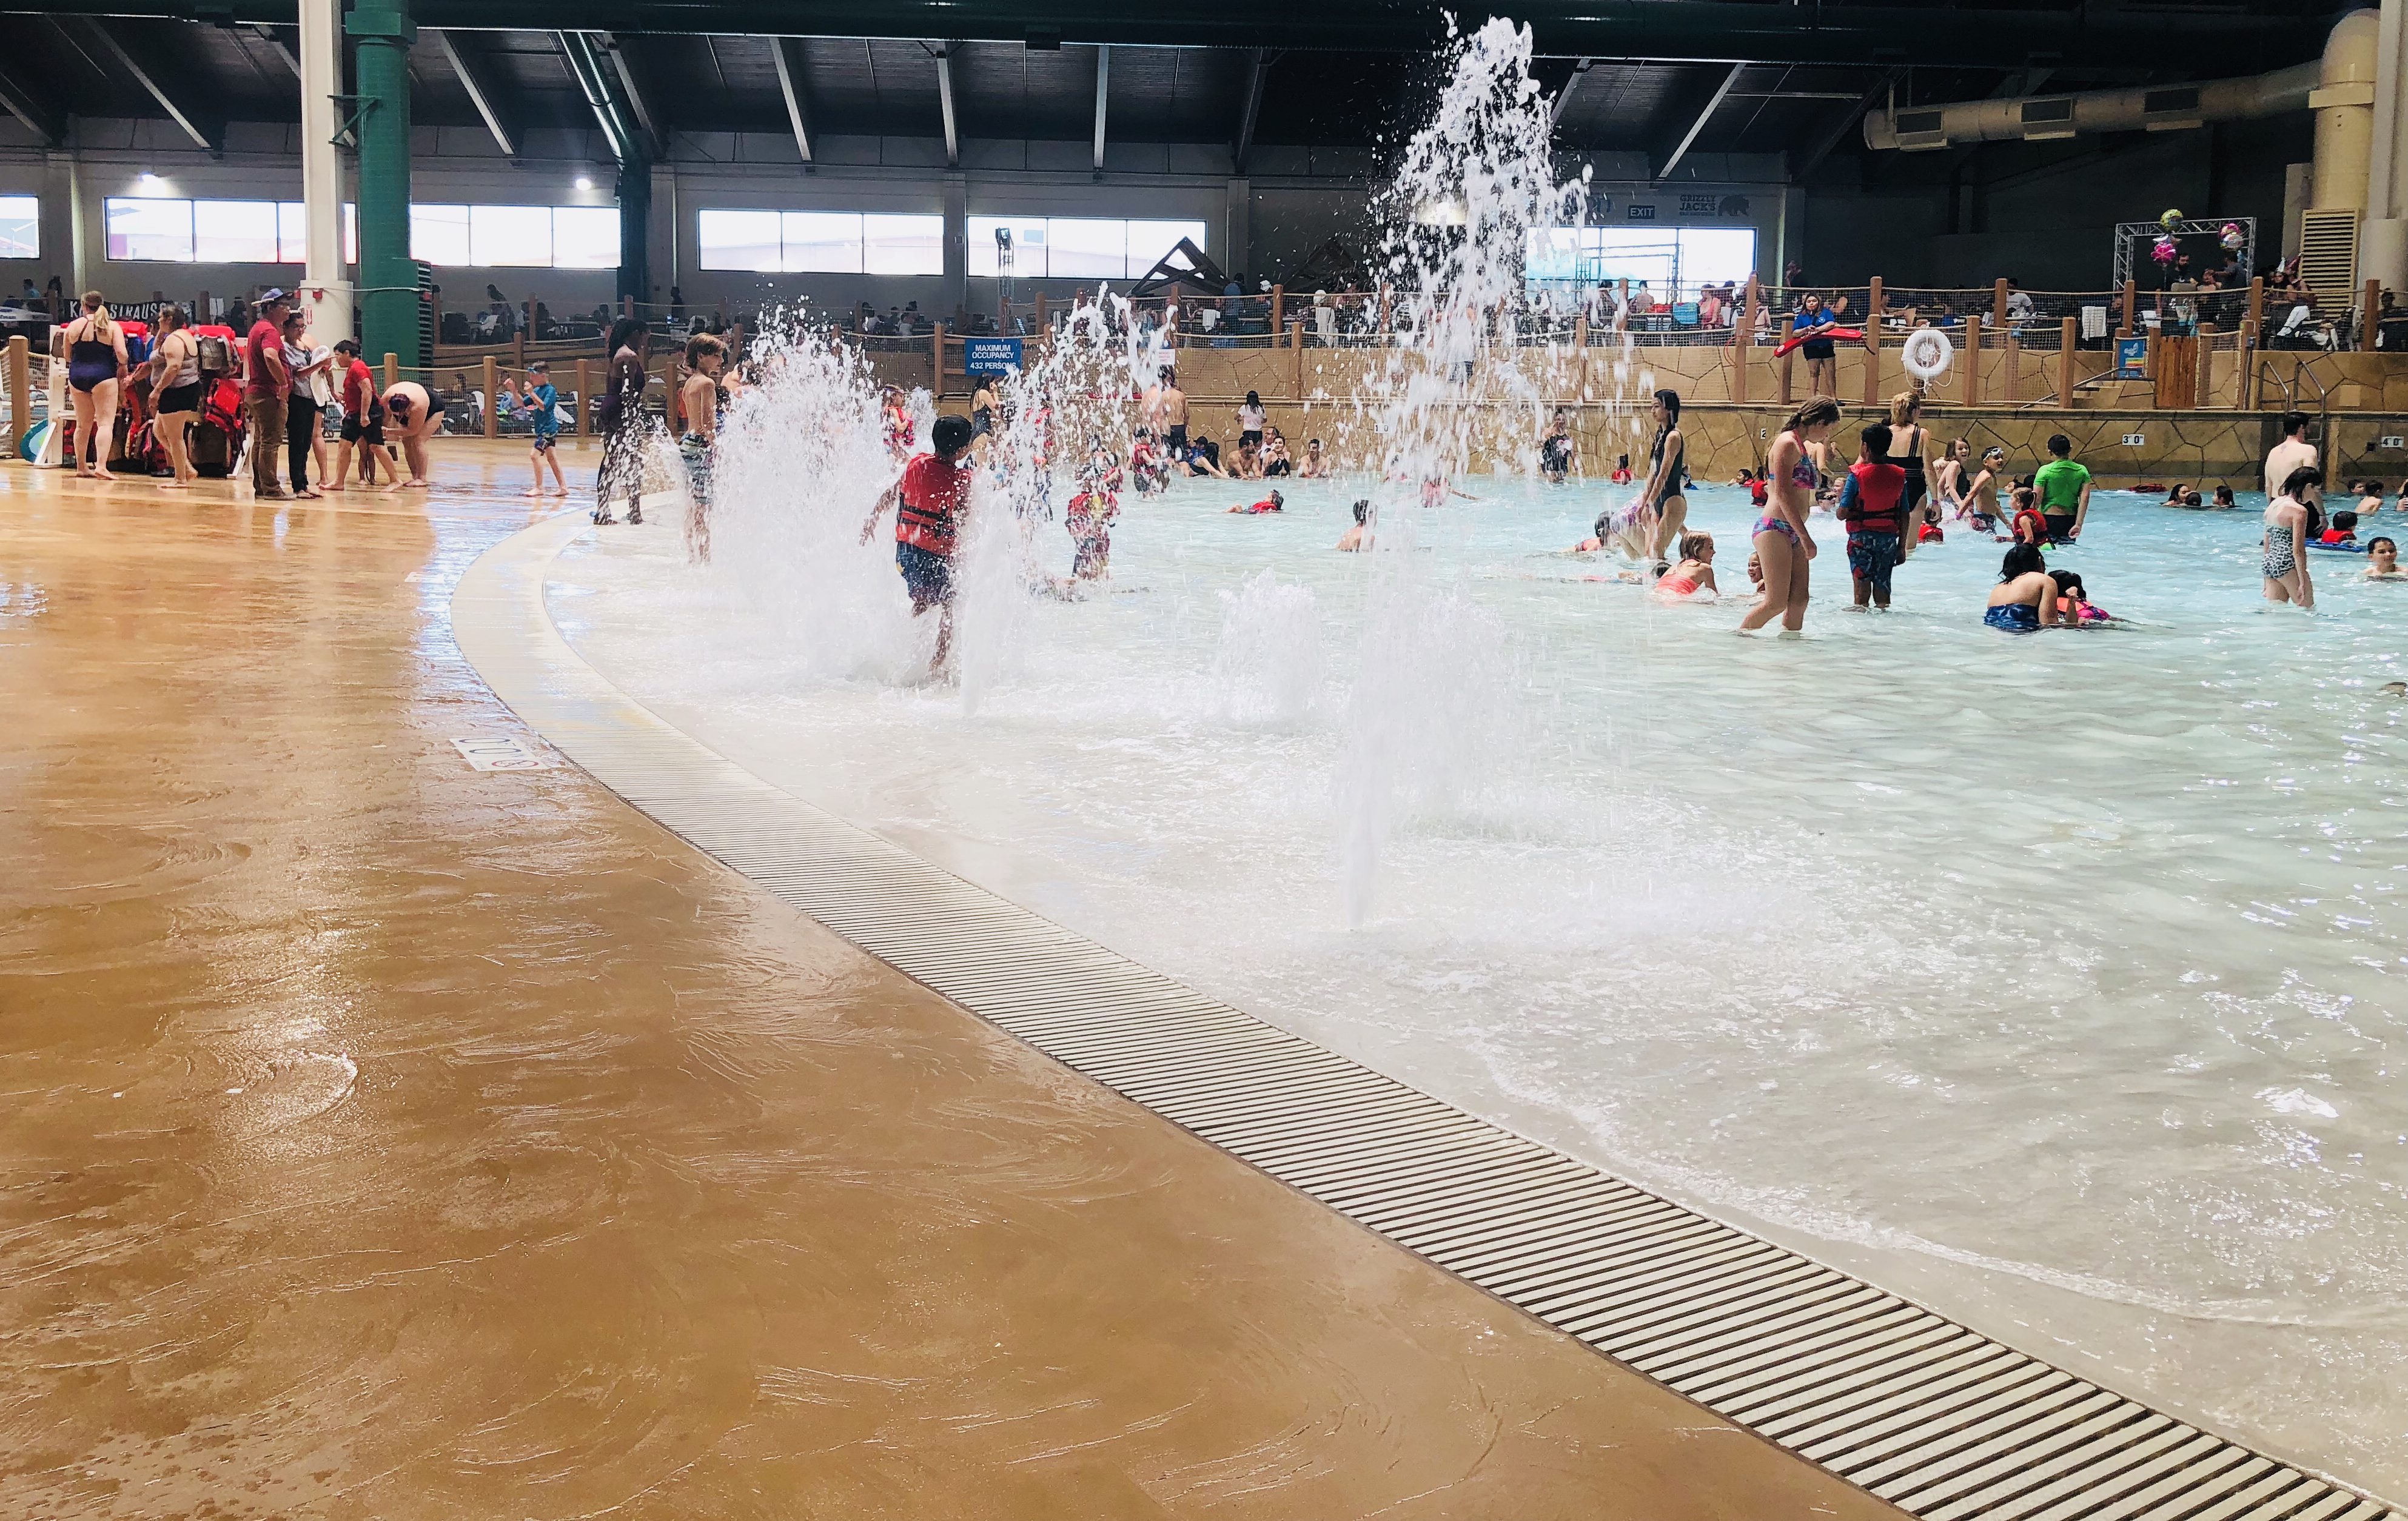 13 Tips To Save Big At Great Wolf Lodge For Your Vacation